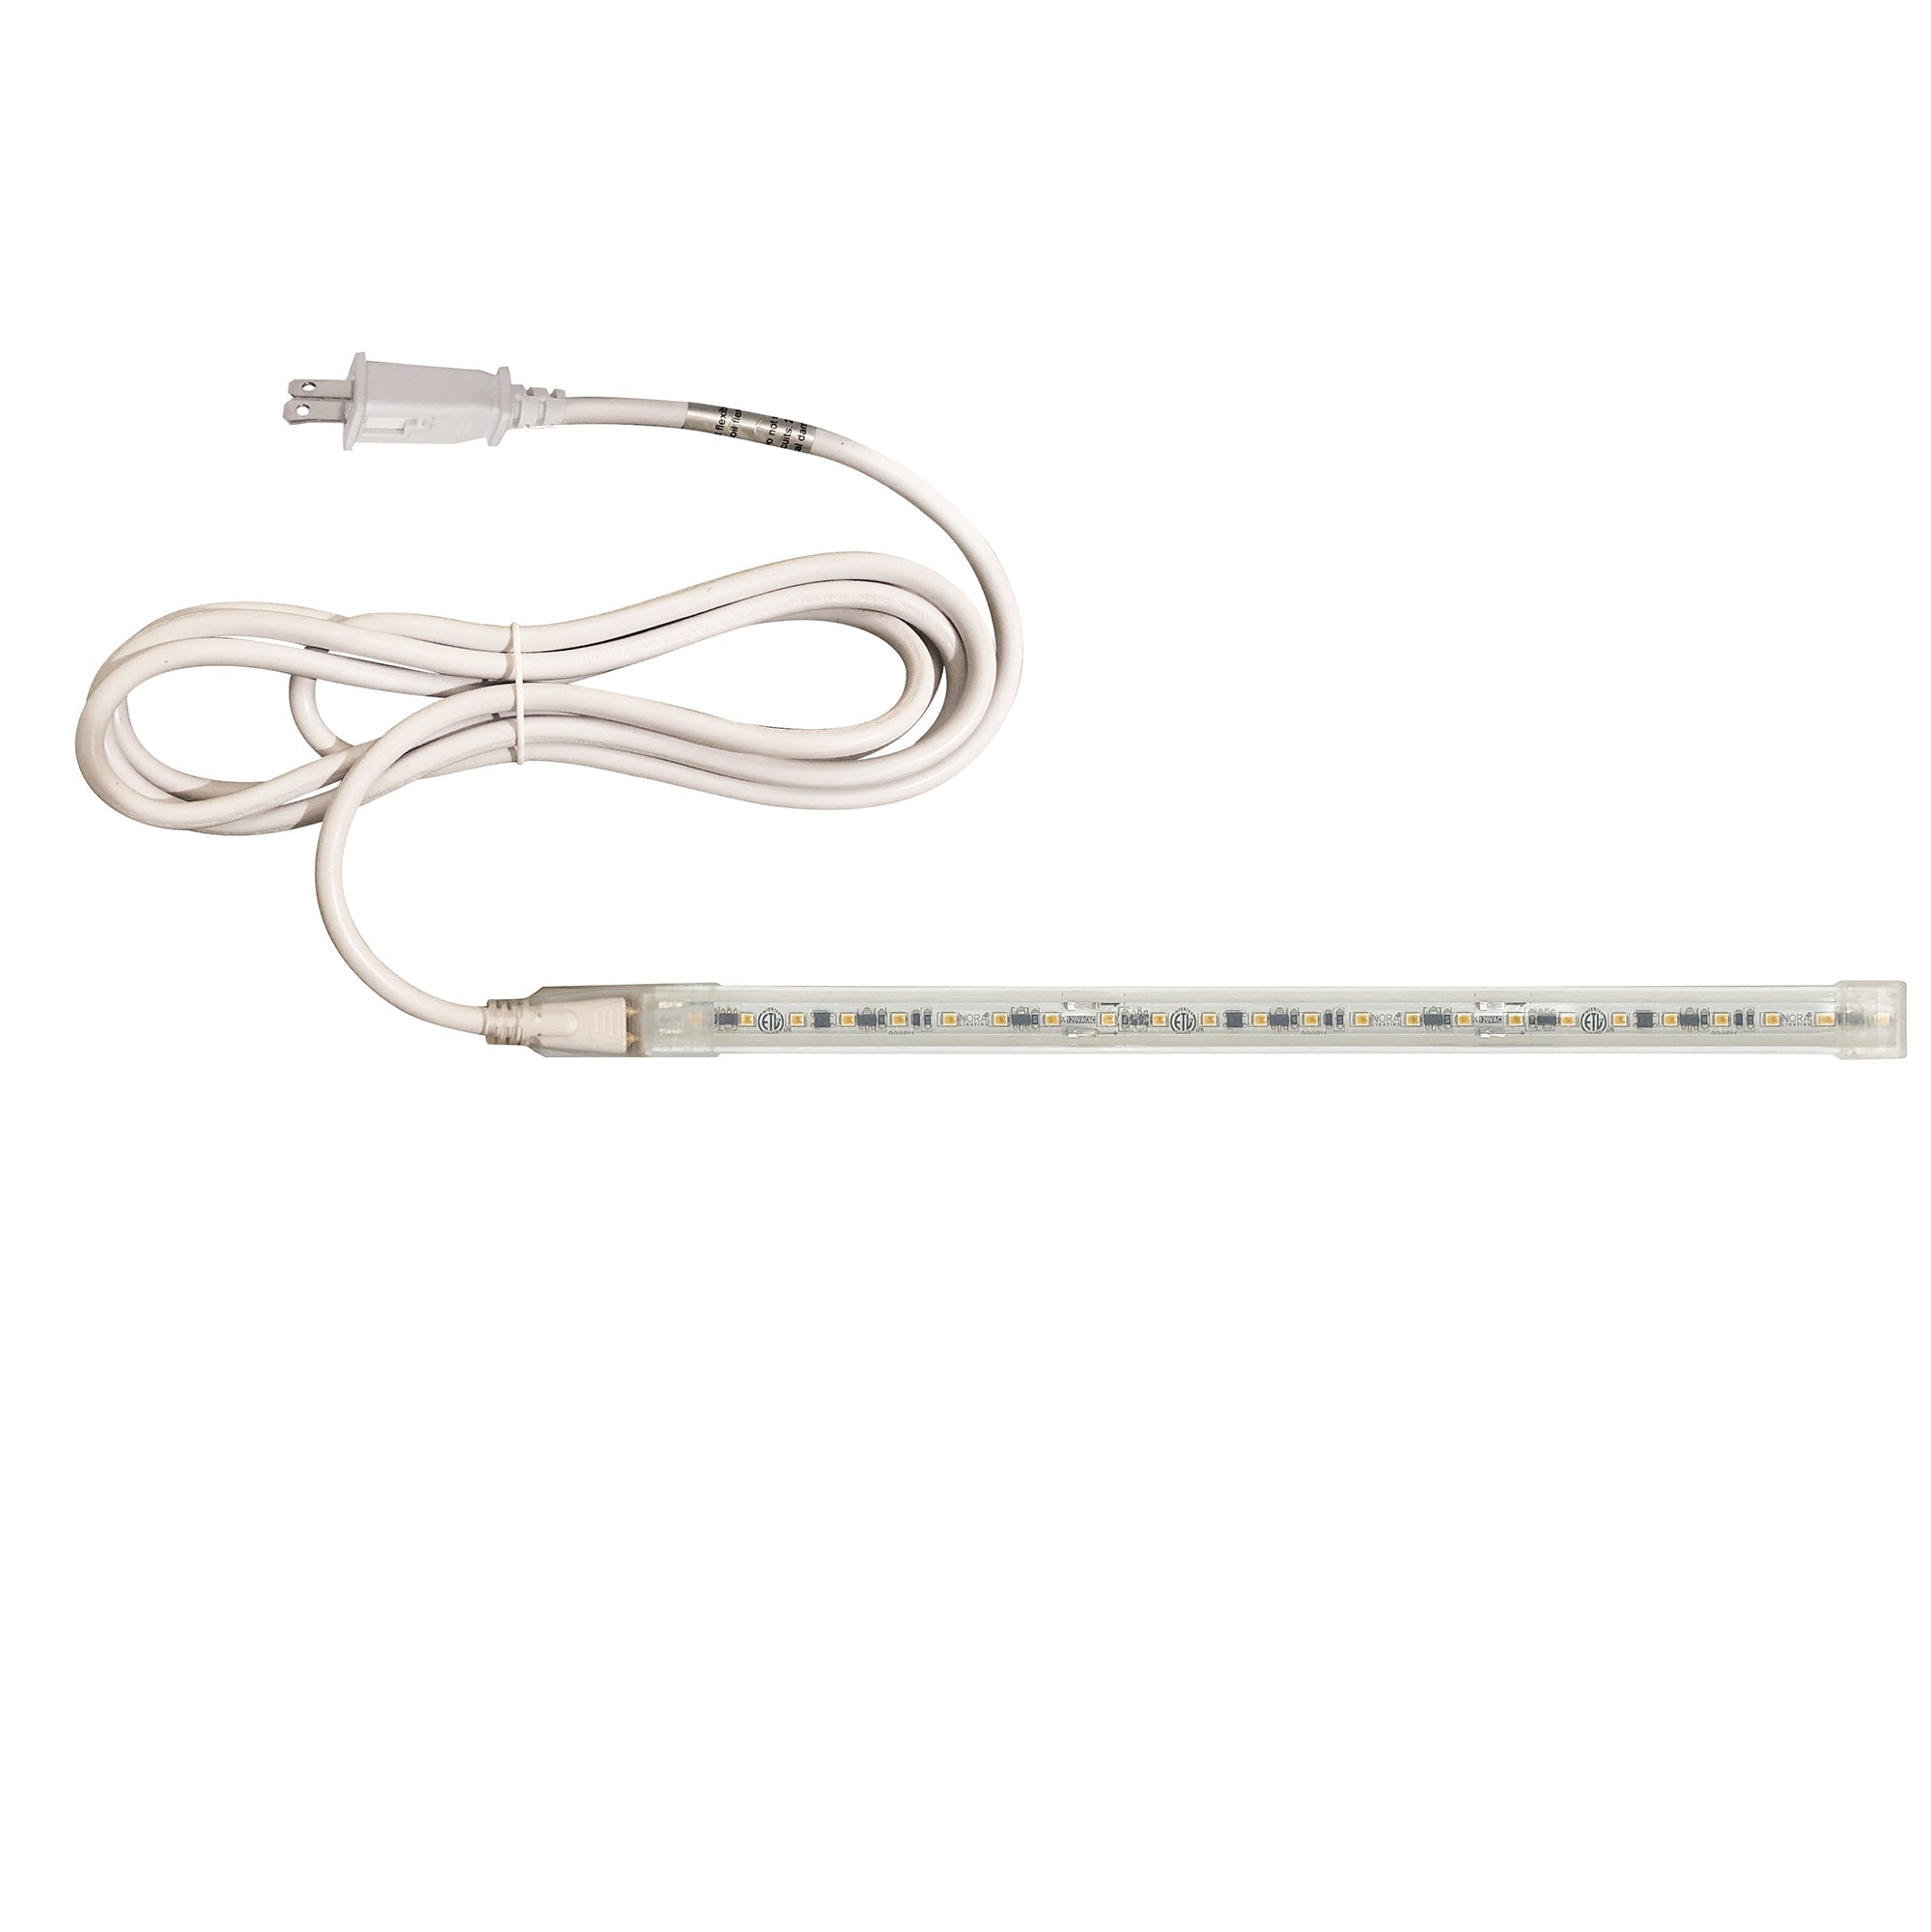 Nora Lighting NUTP13-W9-4-12-927/CP - Accent / Undercabinet - Custom Cut 9-ft, 4-in 120V Continuous LED Tape Light, 330lm / 3.6W per foot, 2700K, w/ Mounting Clips and 8' Cord & Plug